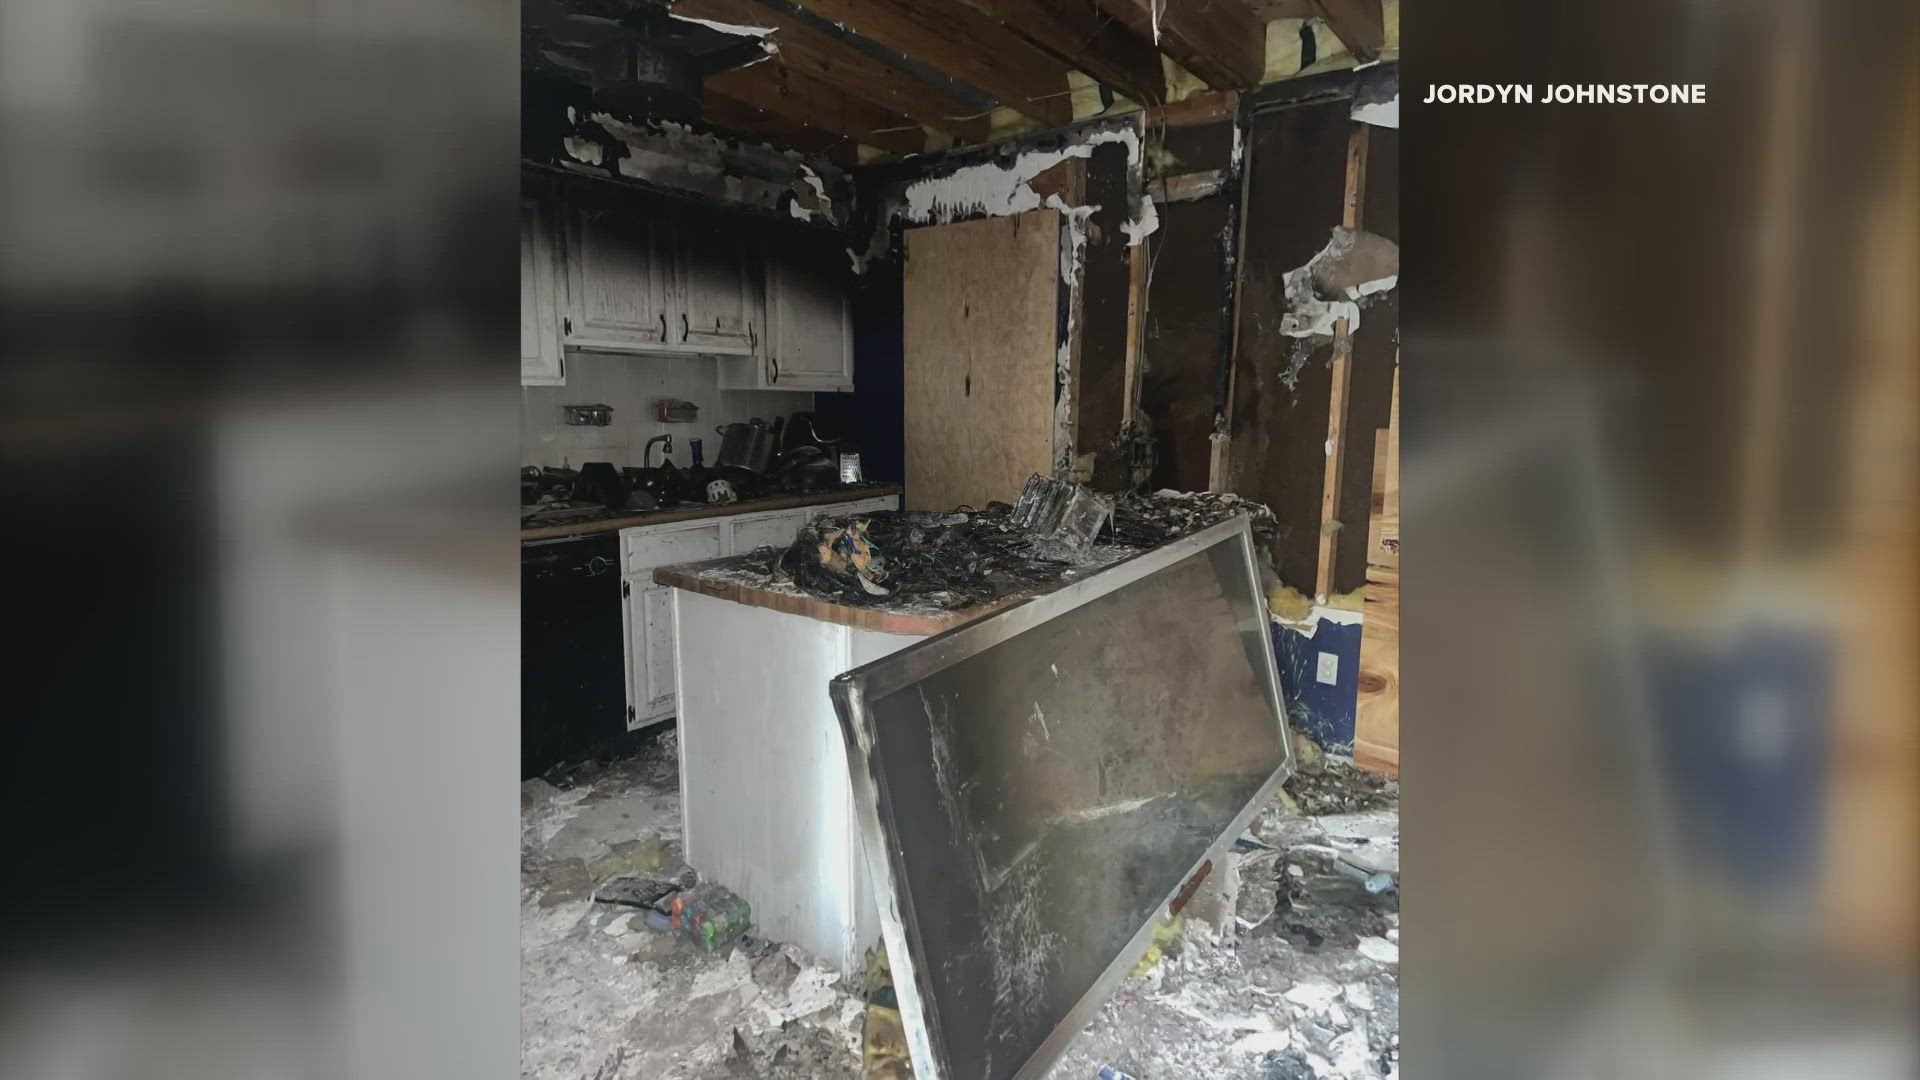 A family of four is recovering after they had to jump from a window to escape an apartment fire last week.